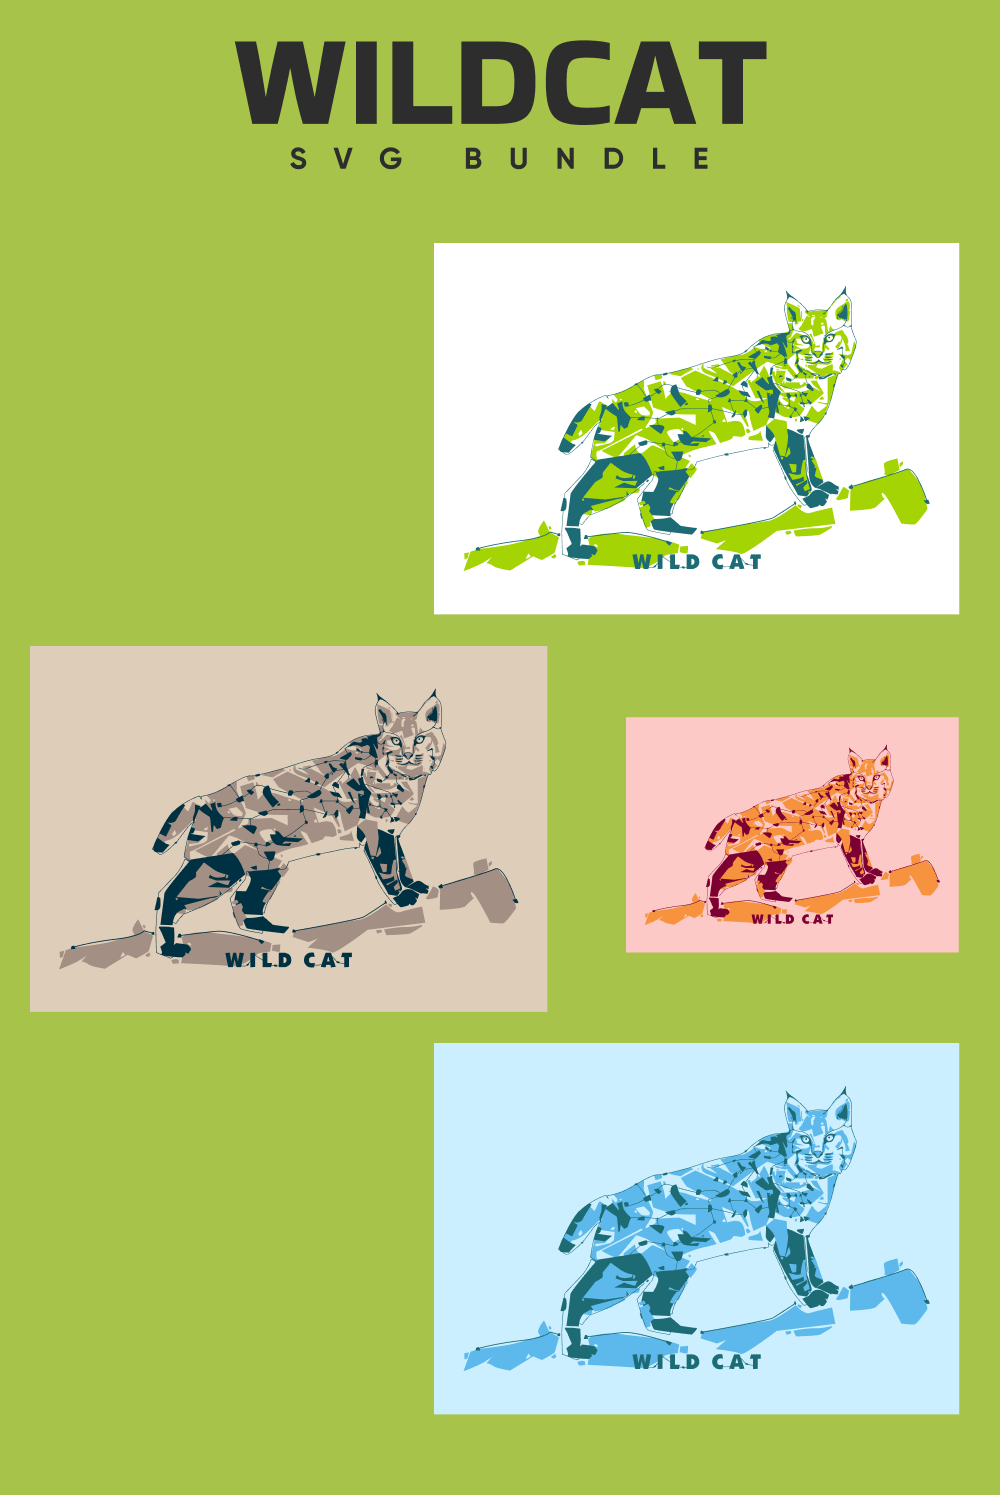 The wildcat svg bundle is shown in four different colors.